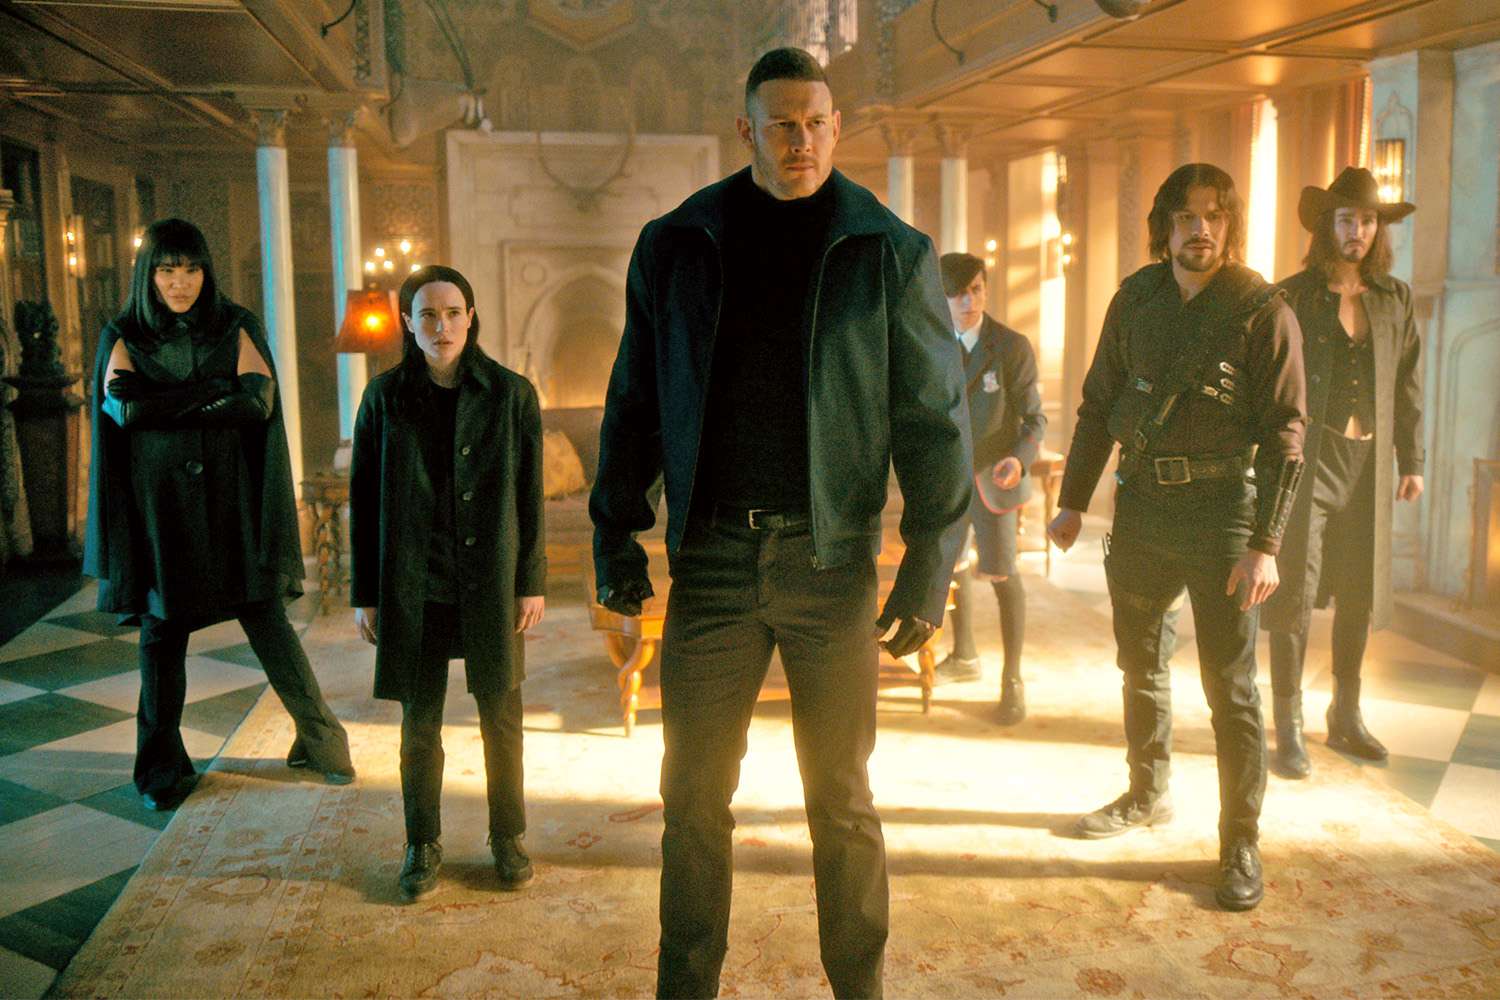 The Umbrella Academy. (L to R) Emmy Raver-Lampman as Allison Hargreeves, Elliot Page, Tom Hopper as Luther Hargreeves, Aidan Gallagher as Number Five, David Castañeda as Diego Hargreeves, Robert Sheehan as Klaus Hargreeves in episode 301 of The Umbrella Academy. Cr. Courtesy of Netflix © 2022